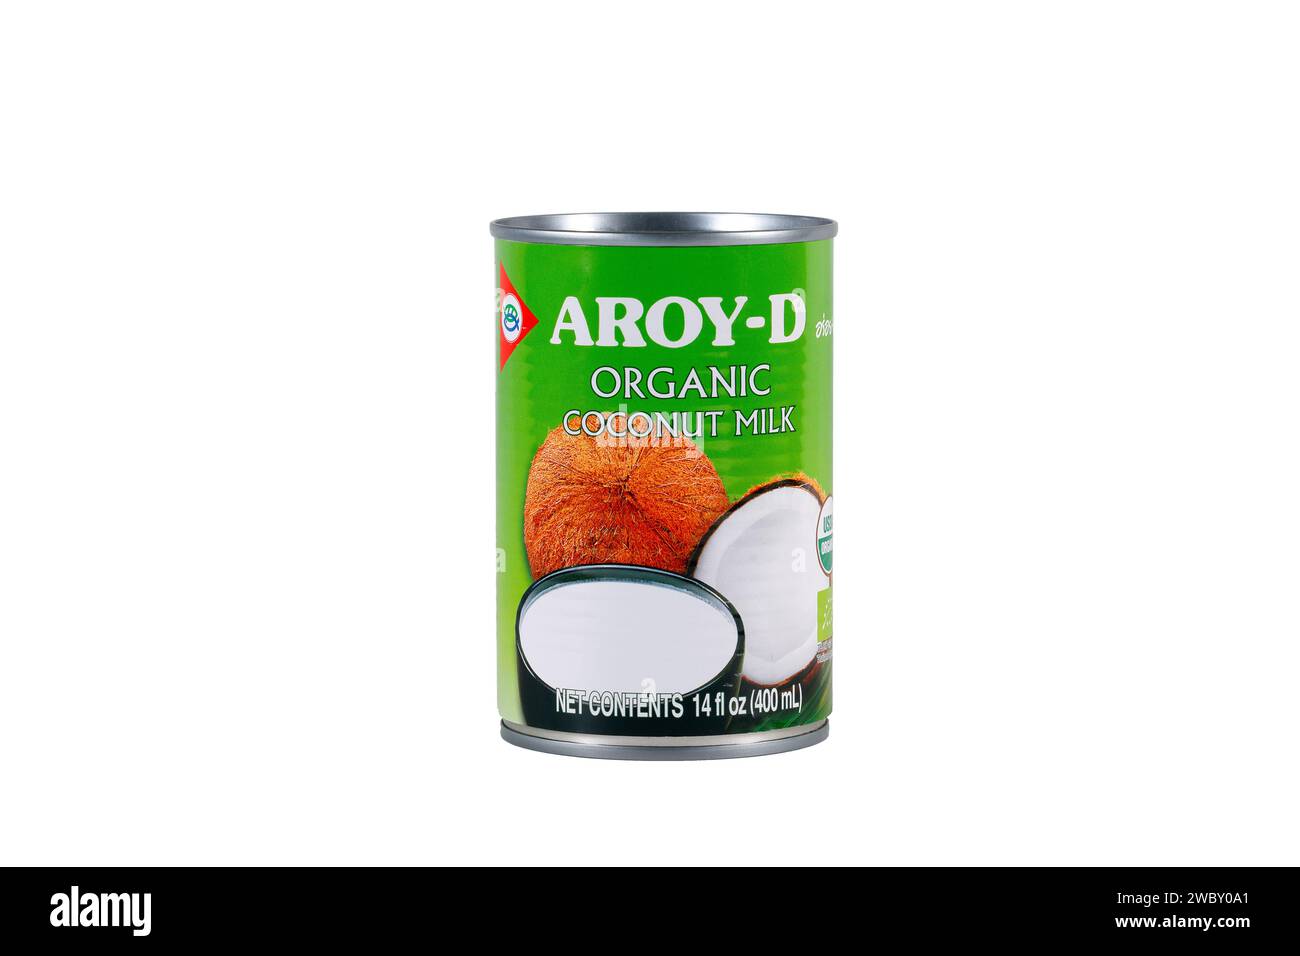 A can of Aroy-D brand Organic Coconut Milk isolated on a white background. cutout image for illustration and editorial use. Stock Photo